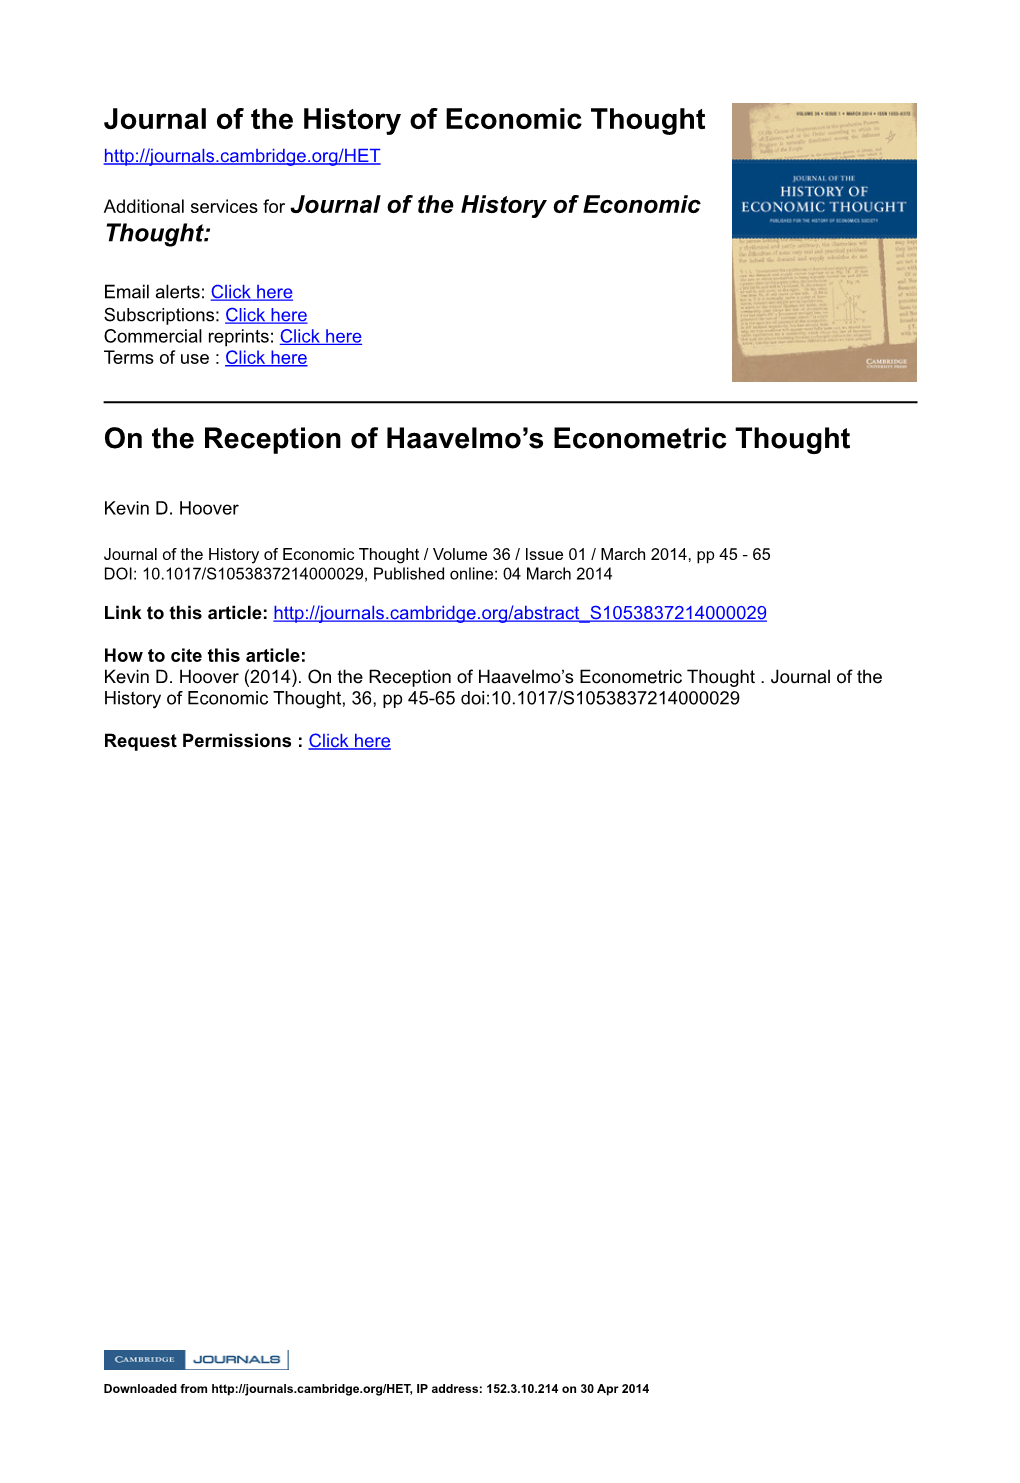 On the Reception of Haavelmo's Econometric Thought